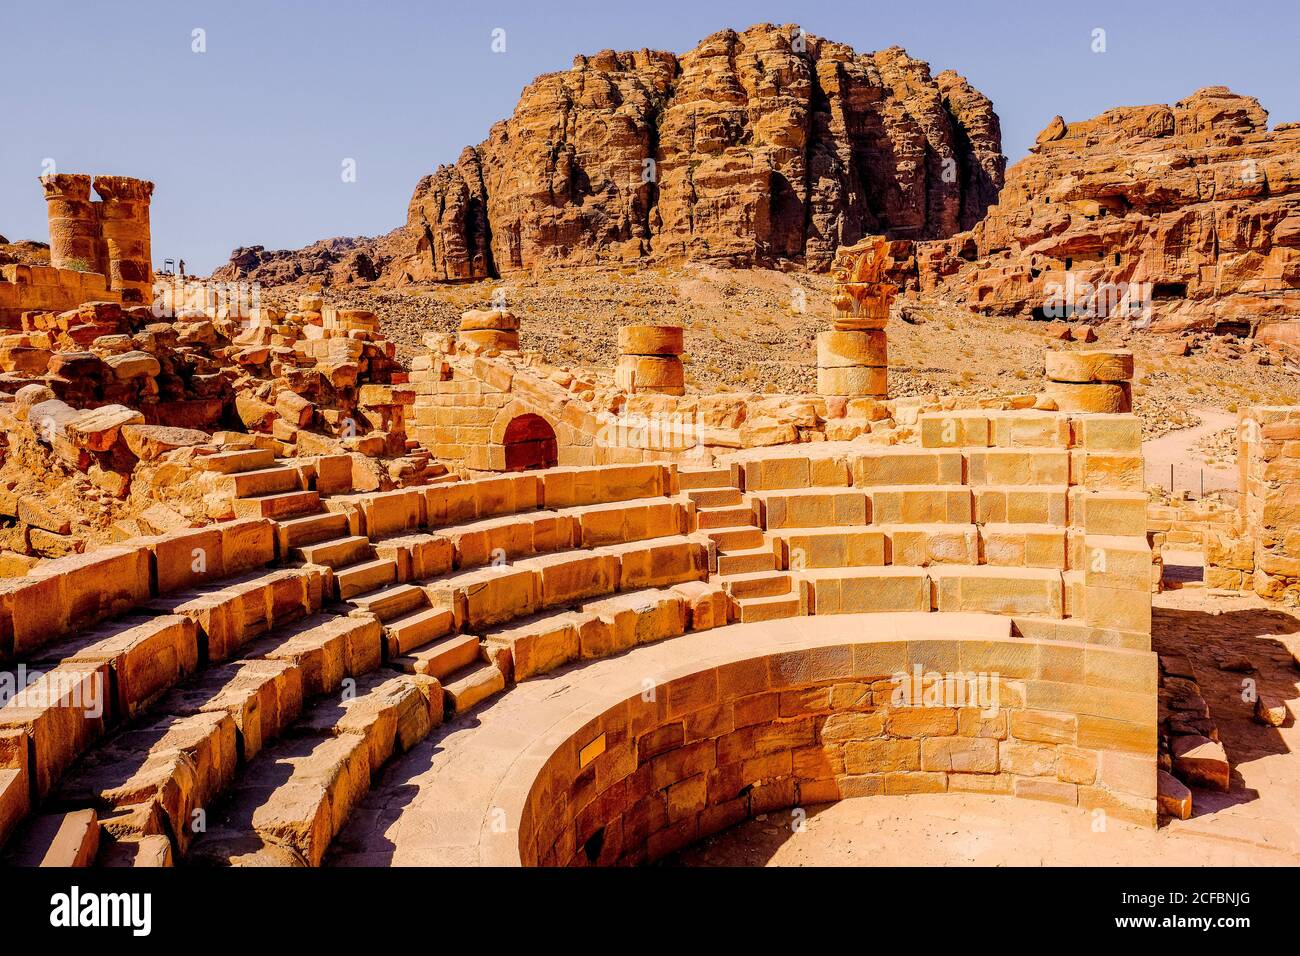 Ancient ruined theater in the city of Petra, Jordan Stock Photo